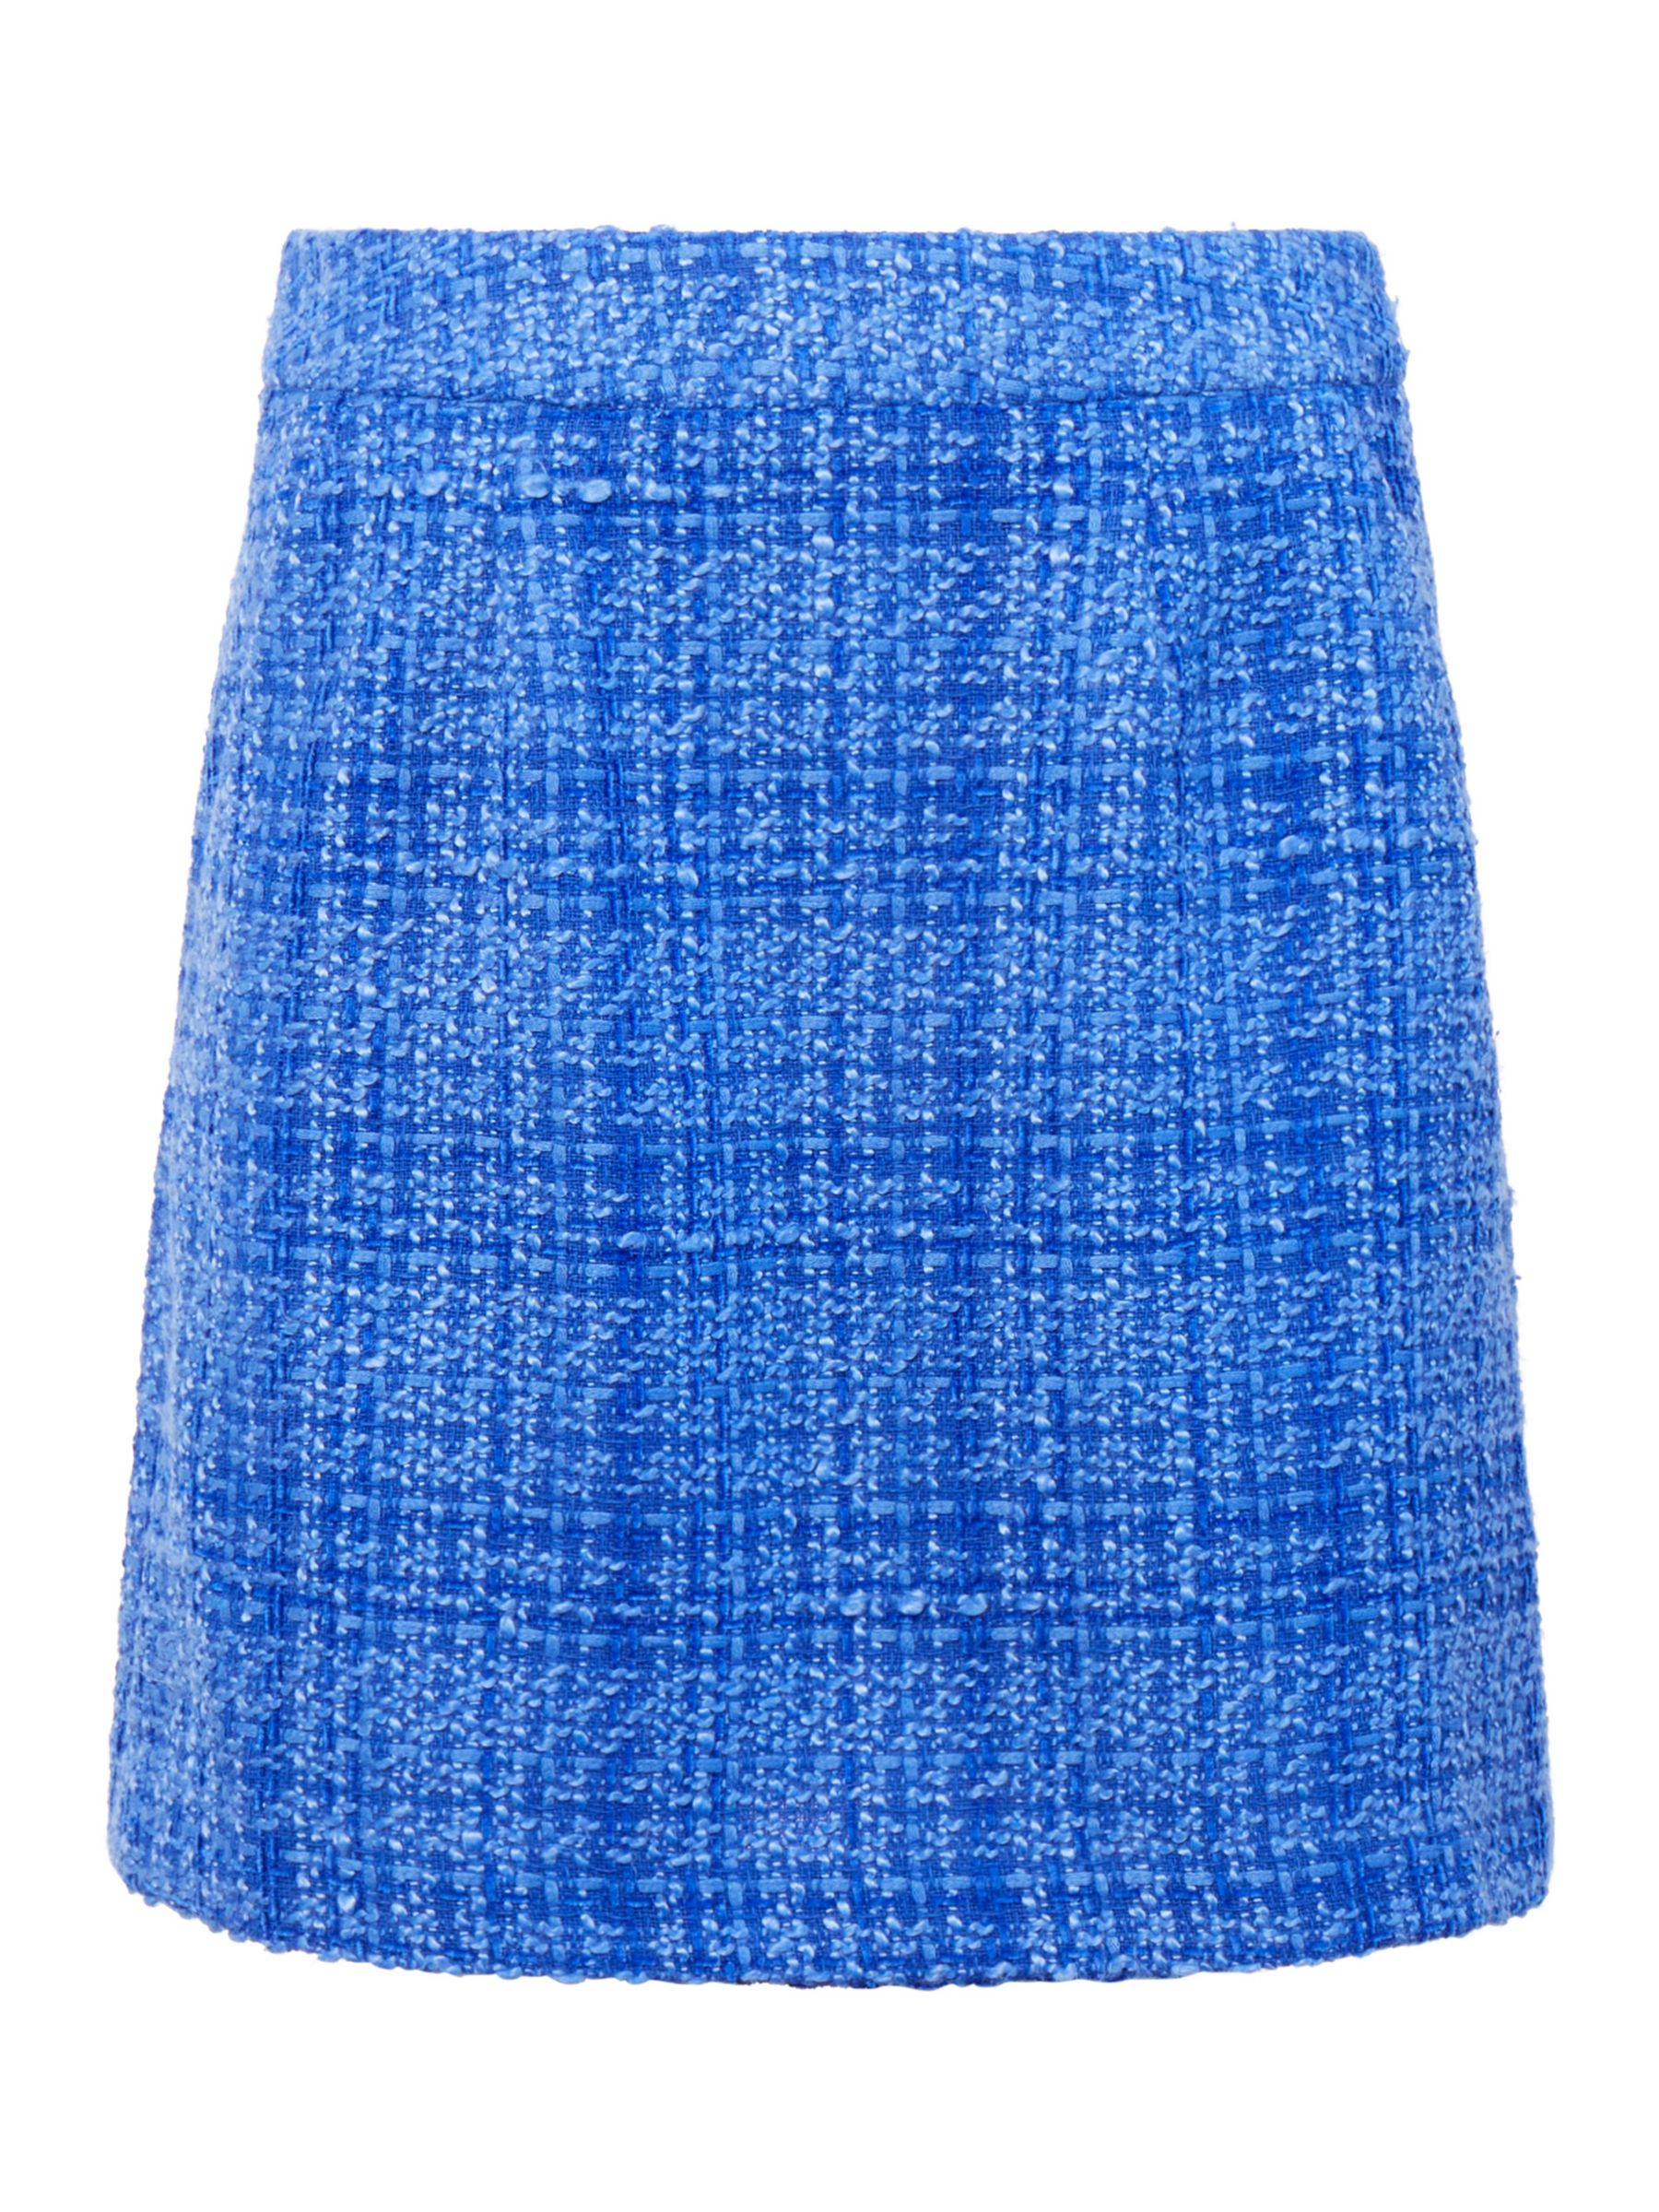 French Connection Azzurra Tweed Mini Skirt, Light Blue Depths, 10